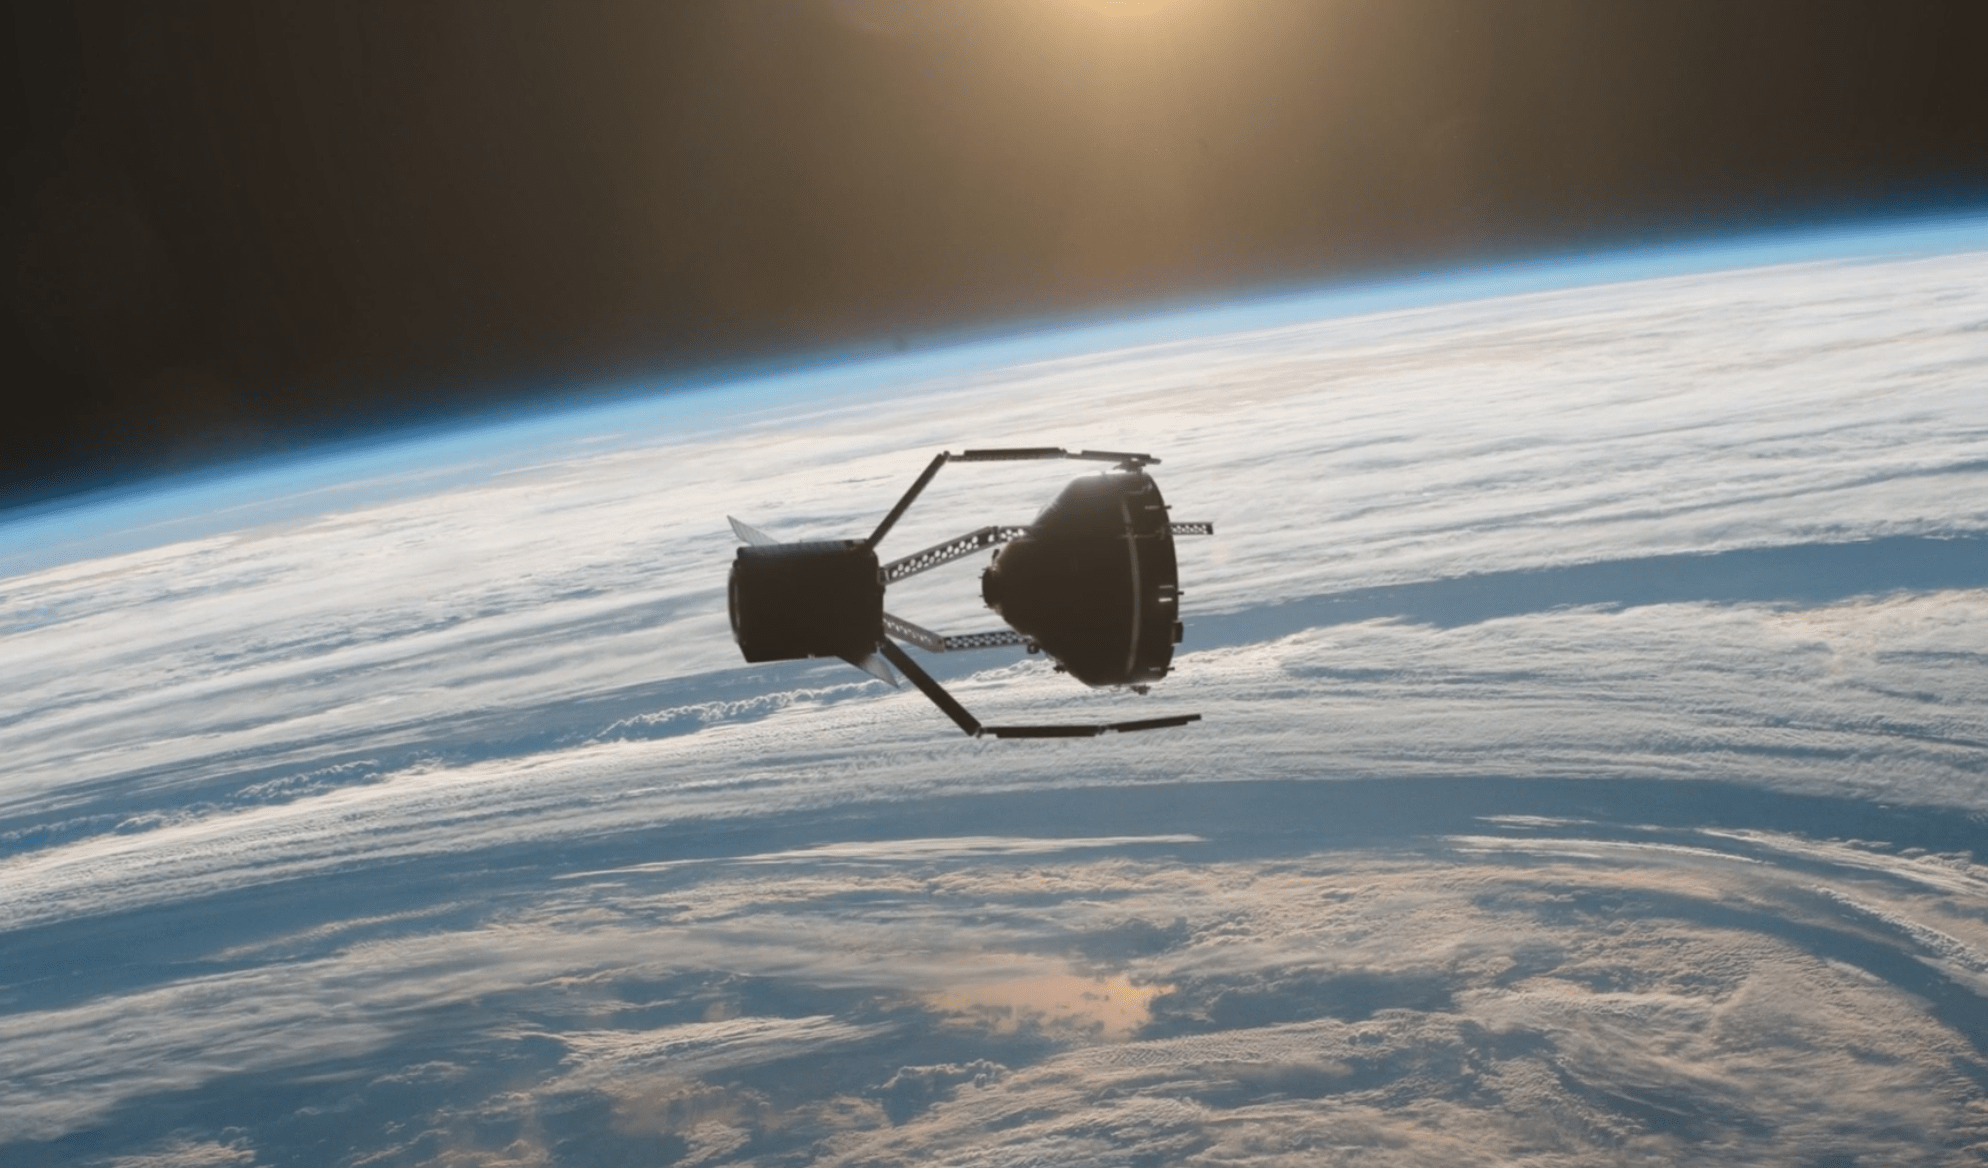 The Clearspace-1 space debris object has been hit by another space debris